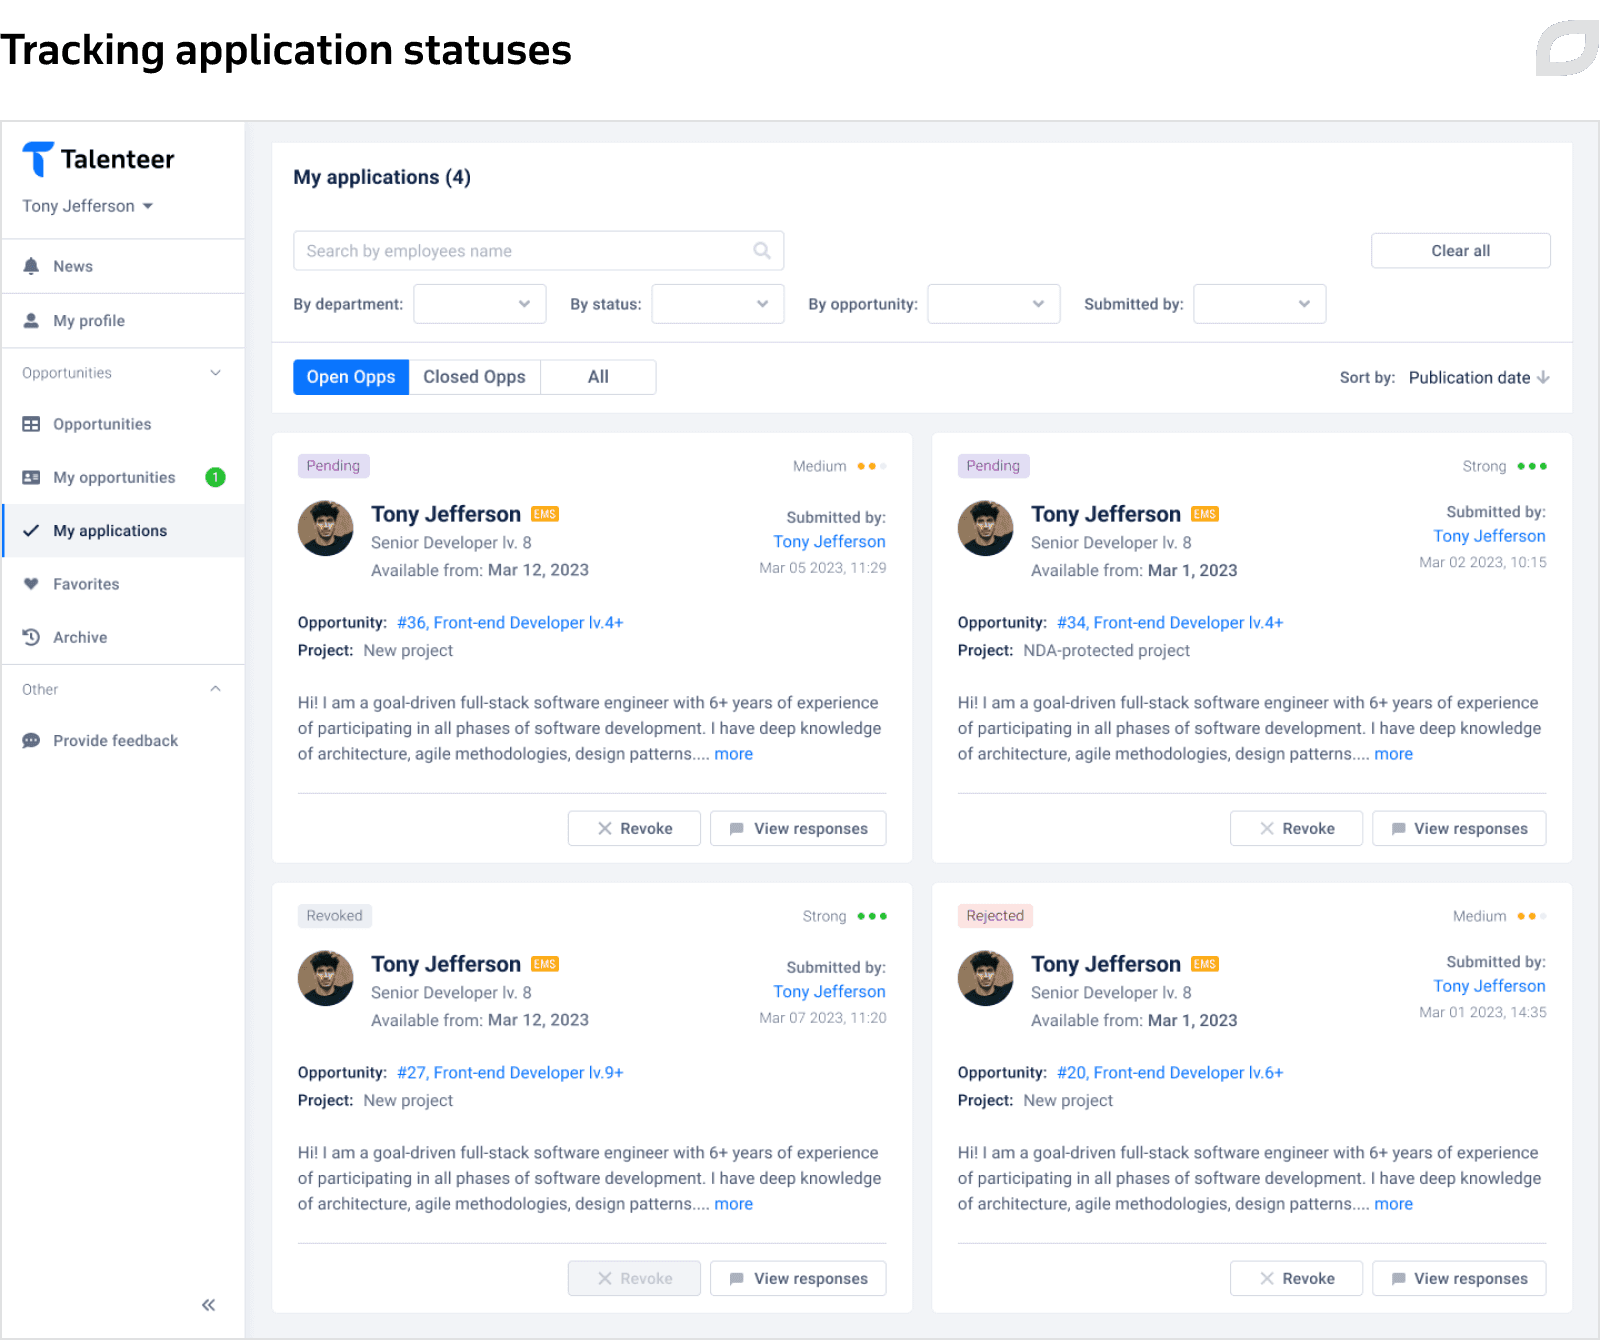 Tracking application statuses